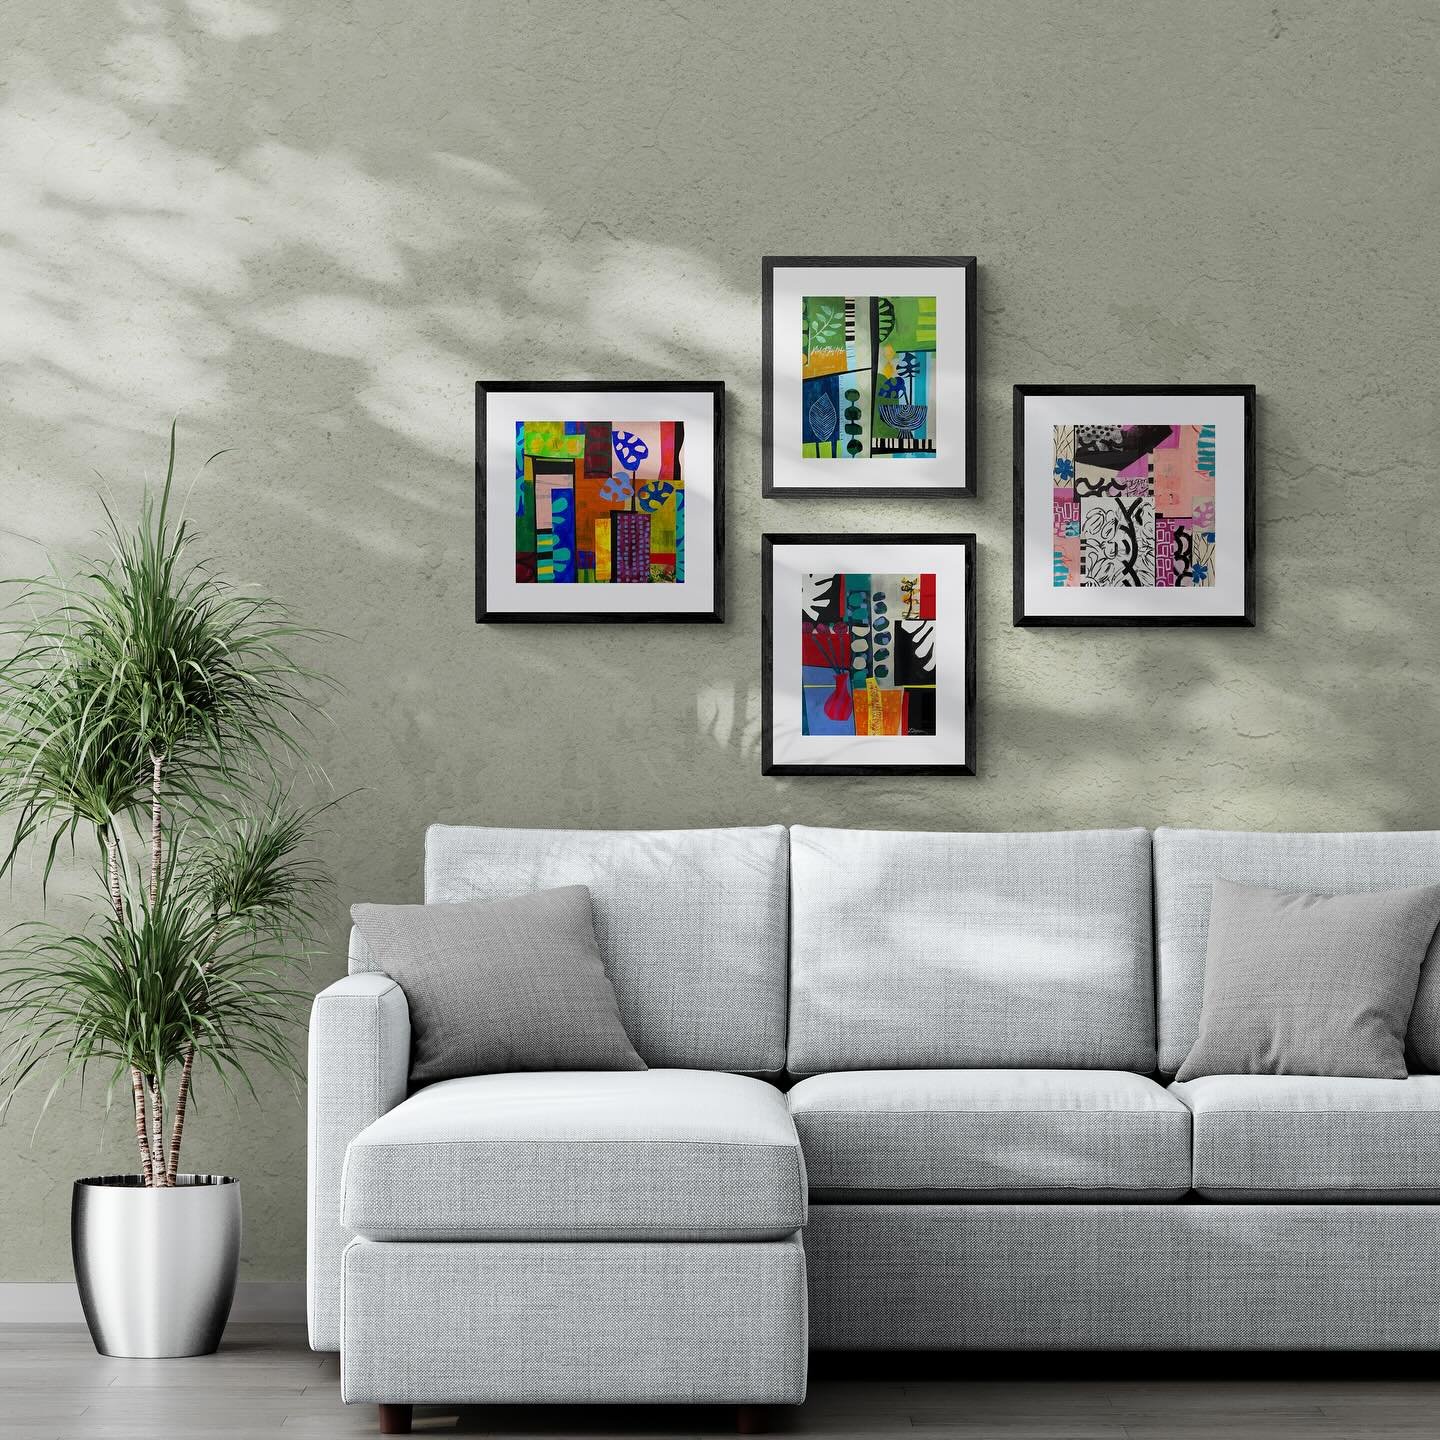 Soon to be available Prints on high-quality paper, capturing every detail and nuance of the original artwork. 

#artwork #abstractart #artworks #printsforsale #printdesign #colorful #vibrant #design #interiordesign #interiorstudio #studio